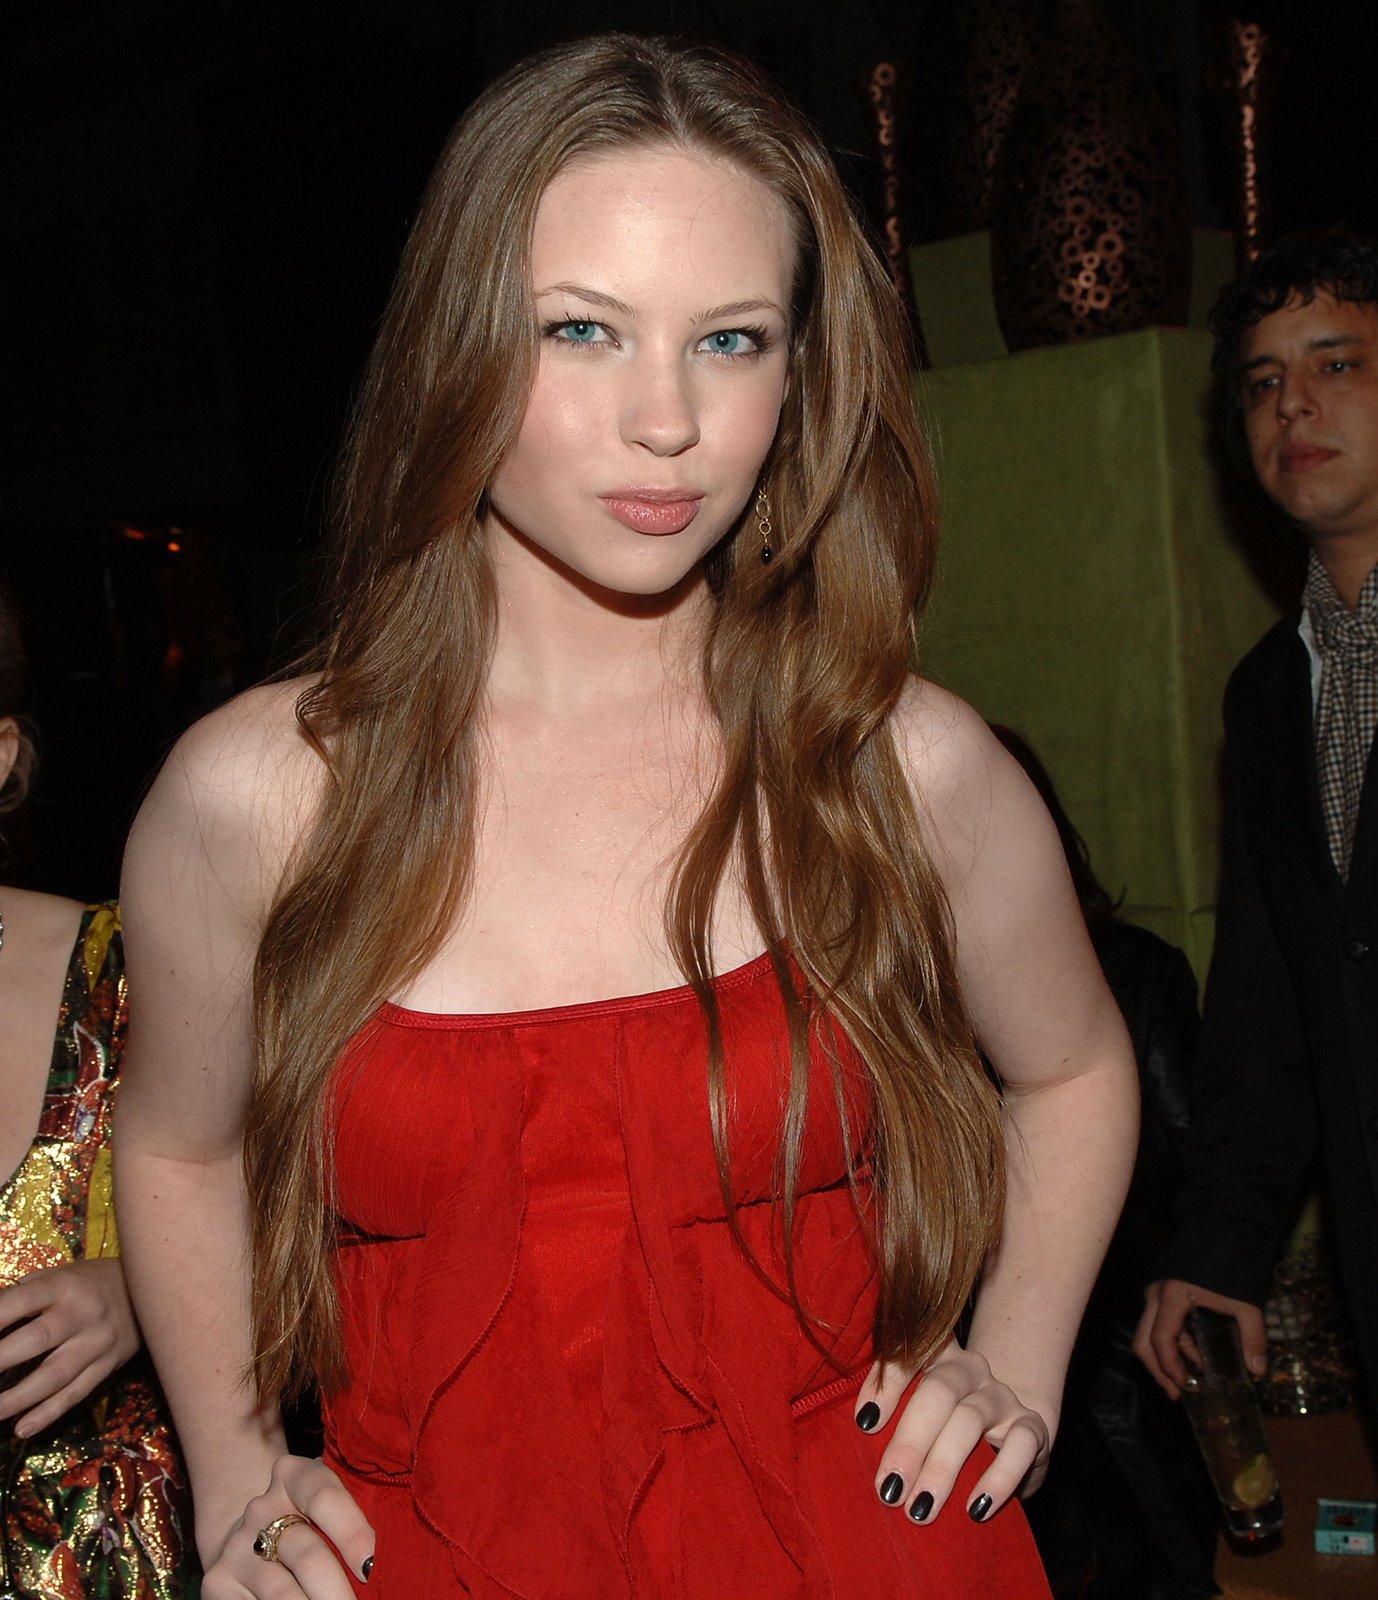 Hot Daveigh Chase Pictures, Sexy Daveigh Chase Photo Gallery.